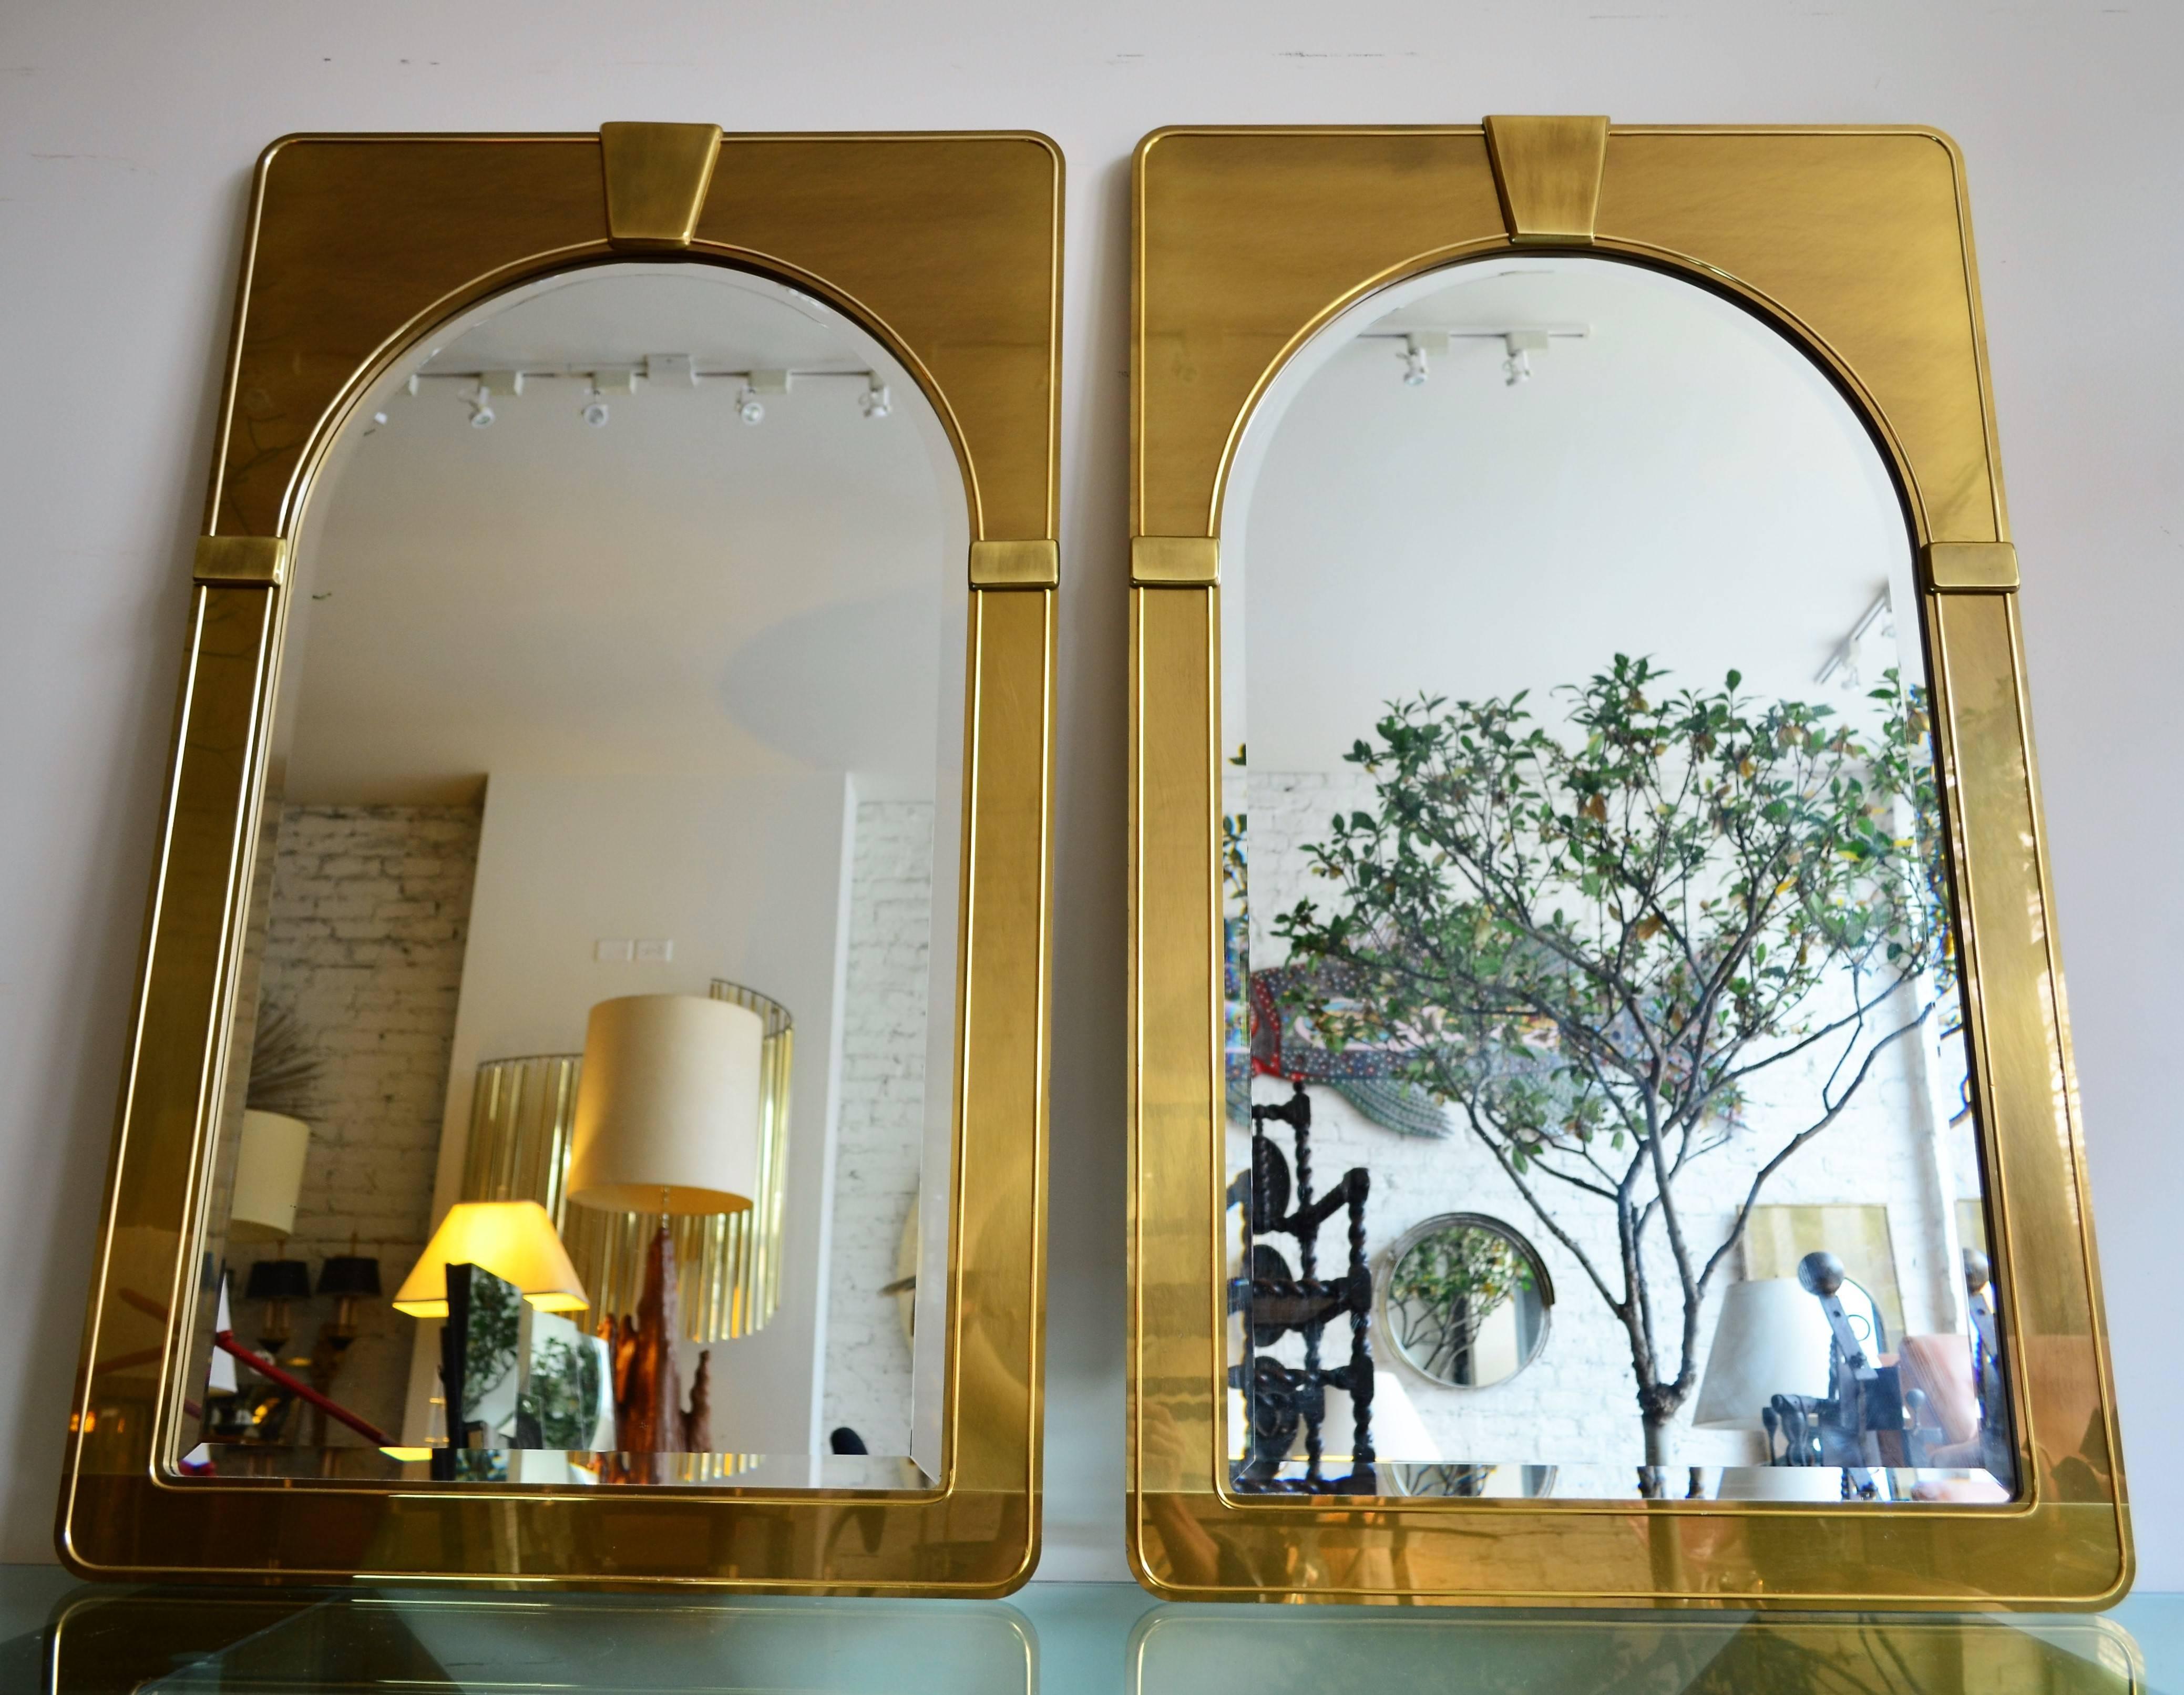 Mastercraft pair of brush brass arched Palladian beveled wall mirrors. 
Uber sophisticated stylized architectural detailing.
Ultra thin profile. Finest quality.